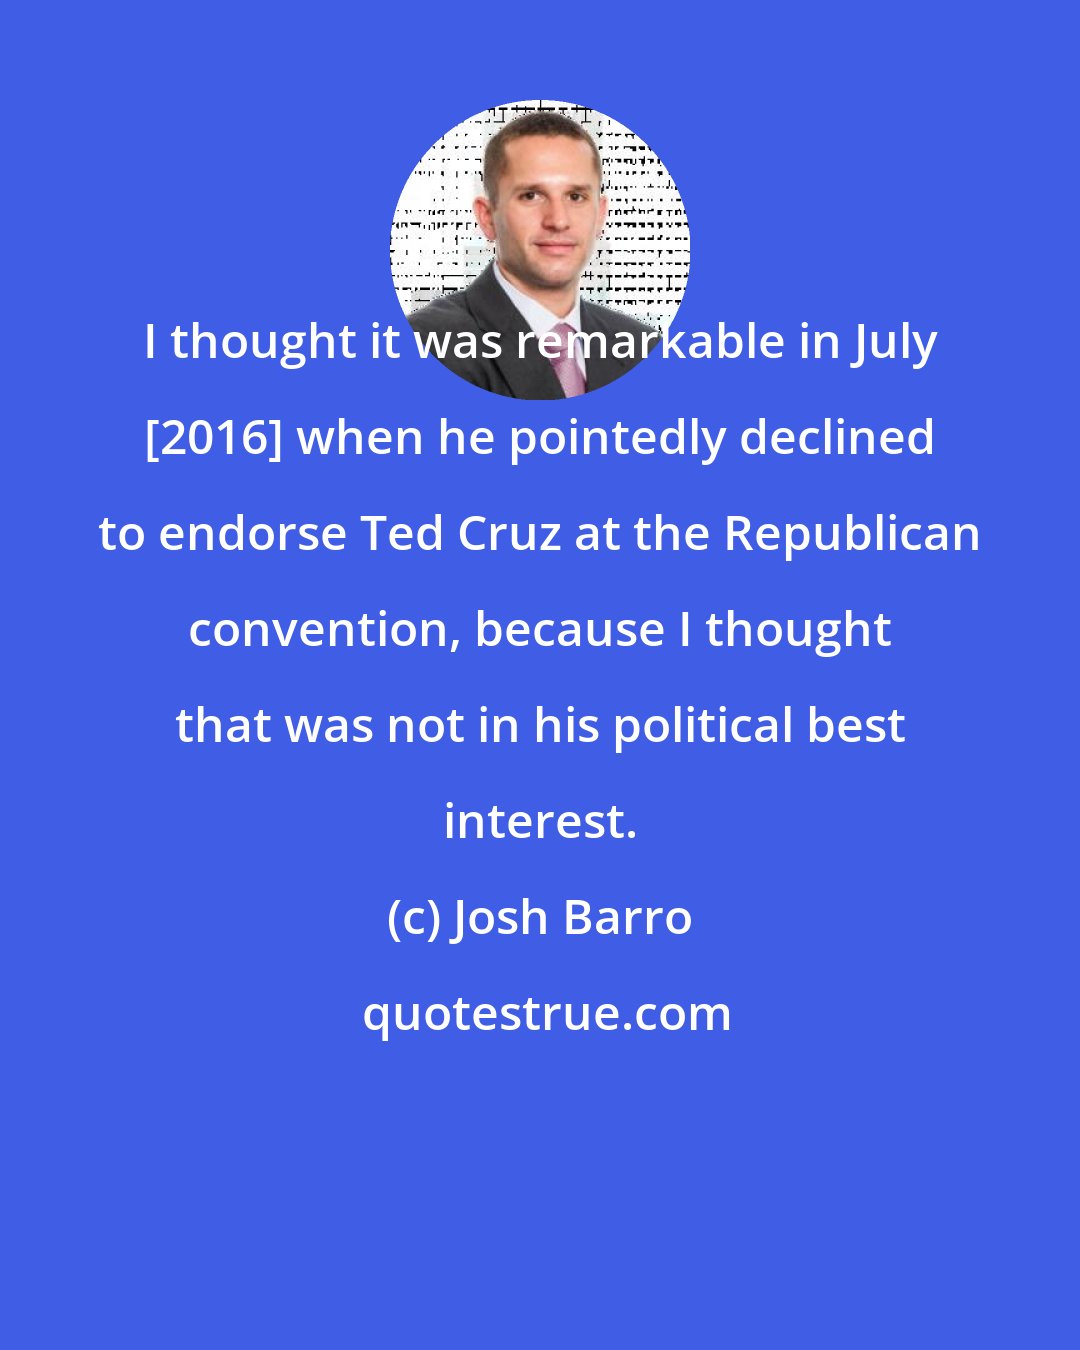 Josh Barro: I thought it was remarkable in July [2016] when he pointedly declined to endorse Ted Cruz at the Republican convention, because I thought that was not in his political best interest.